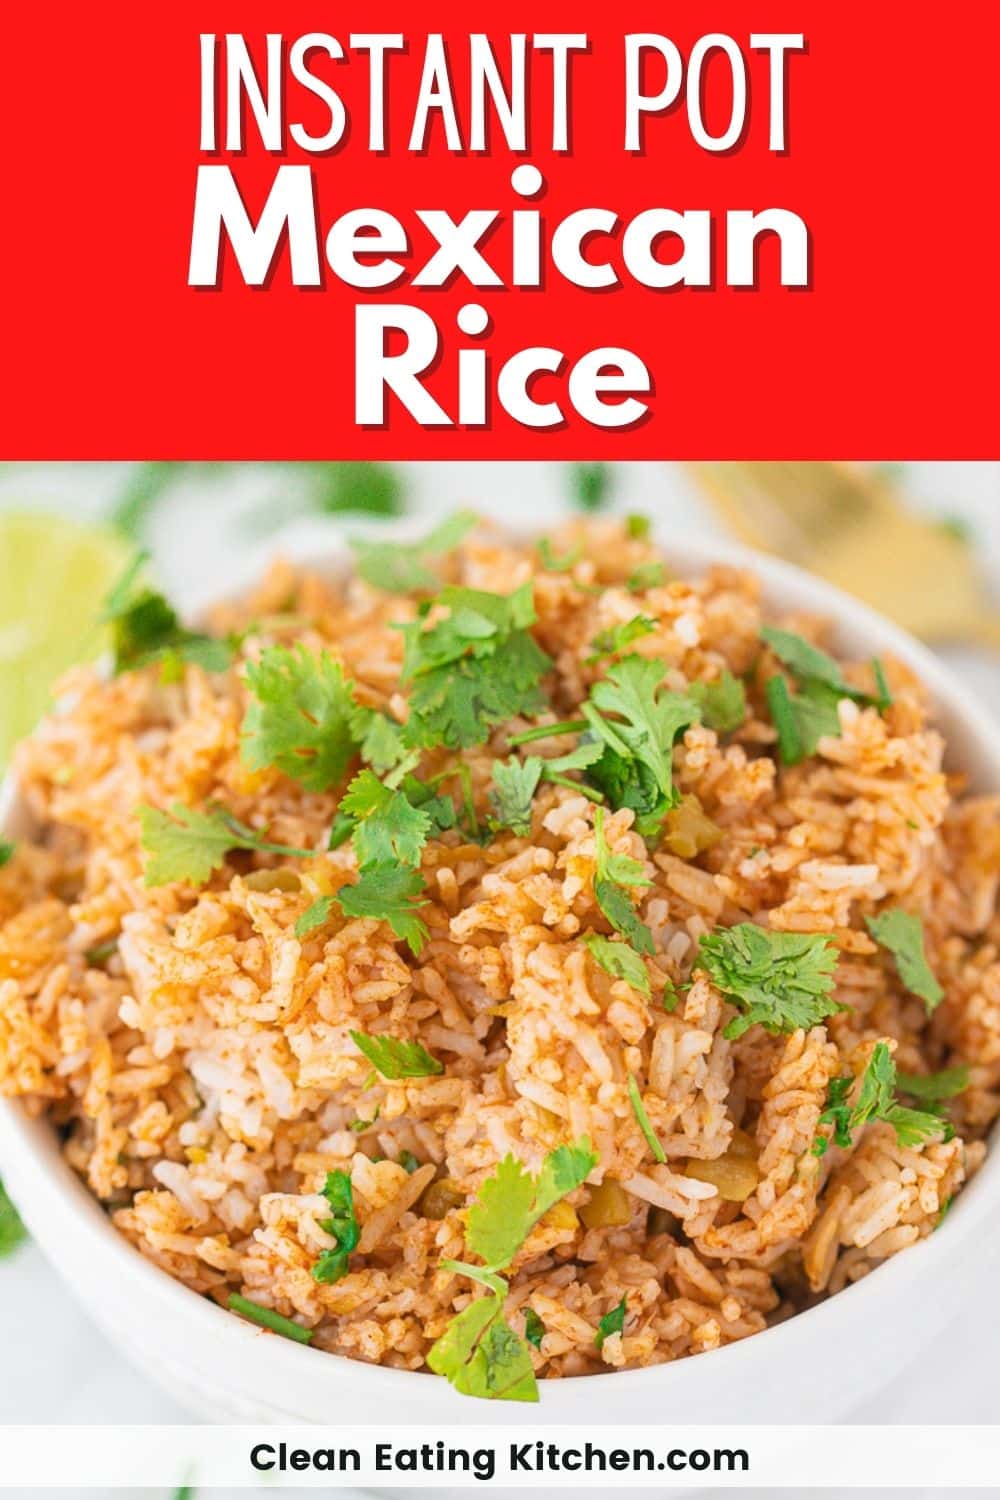 Instant Pot Mexican Rice - Clean Eating Kitchen